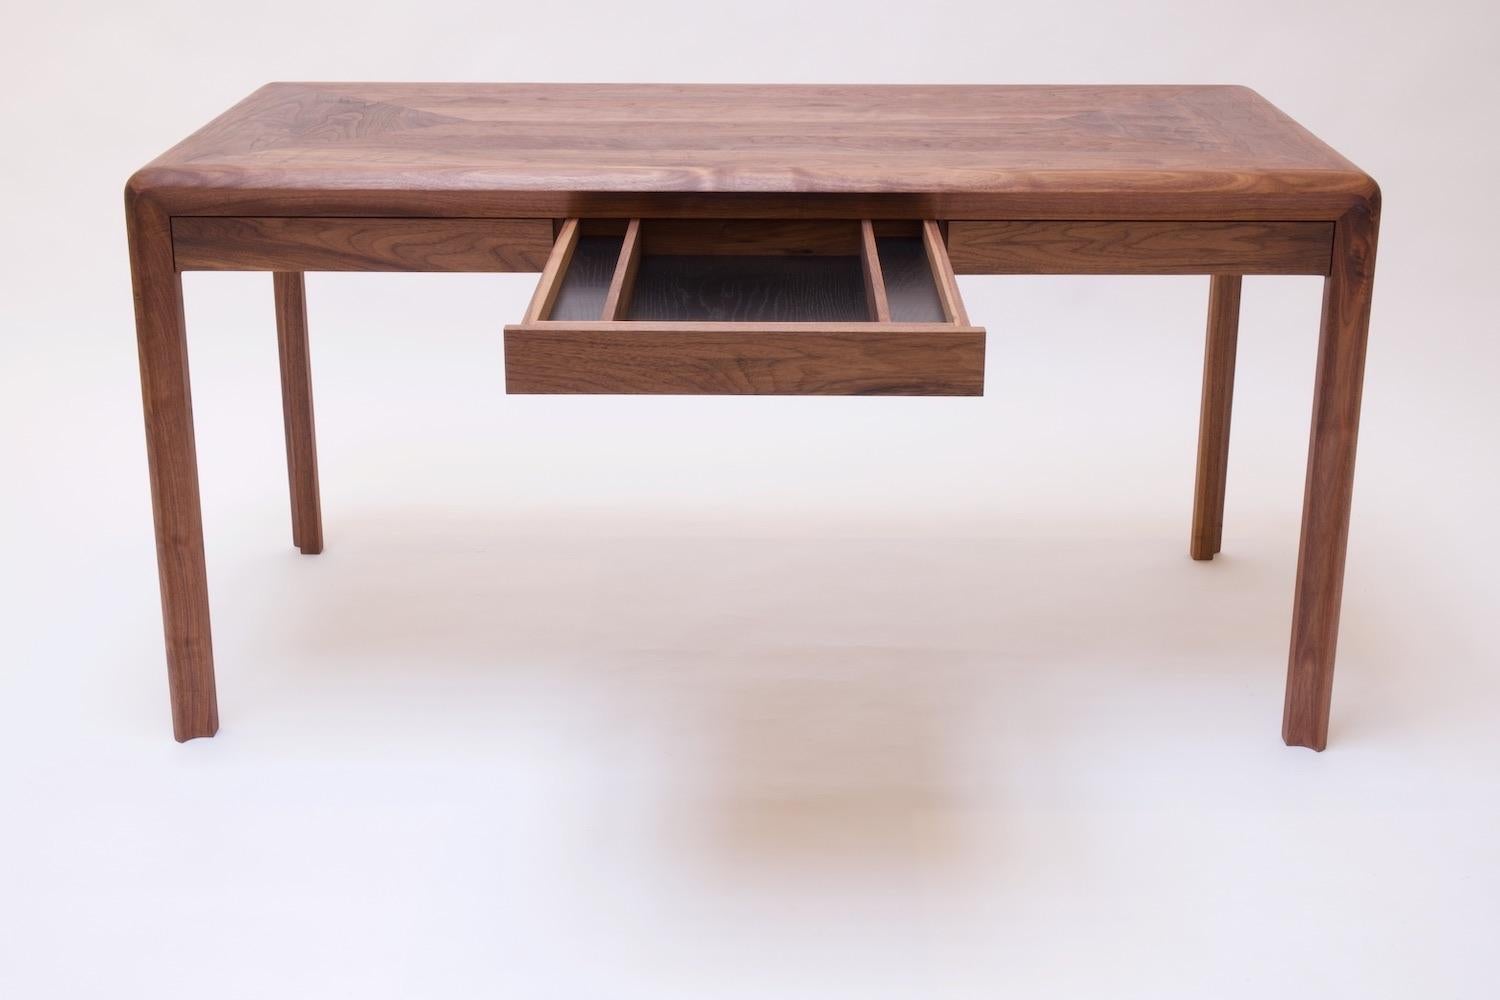 Radius Cutaway Walnut Desk with Drawers In New Condition For Sale In brooklyn, NY